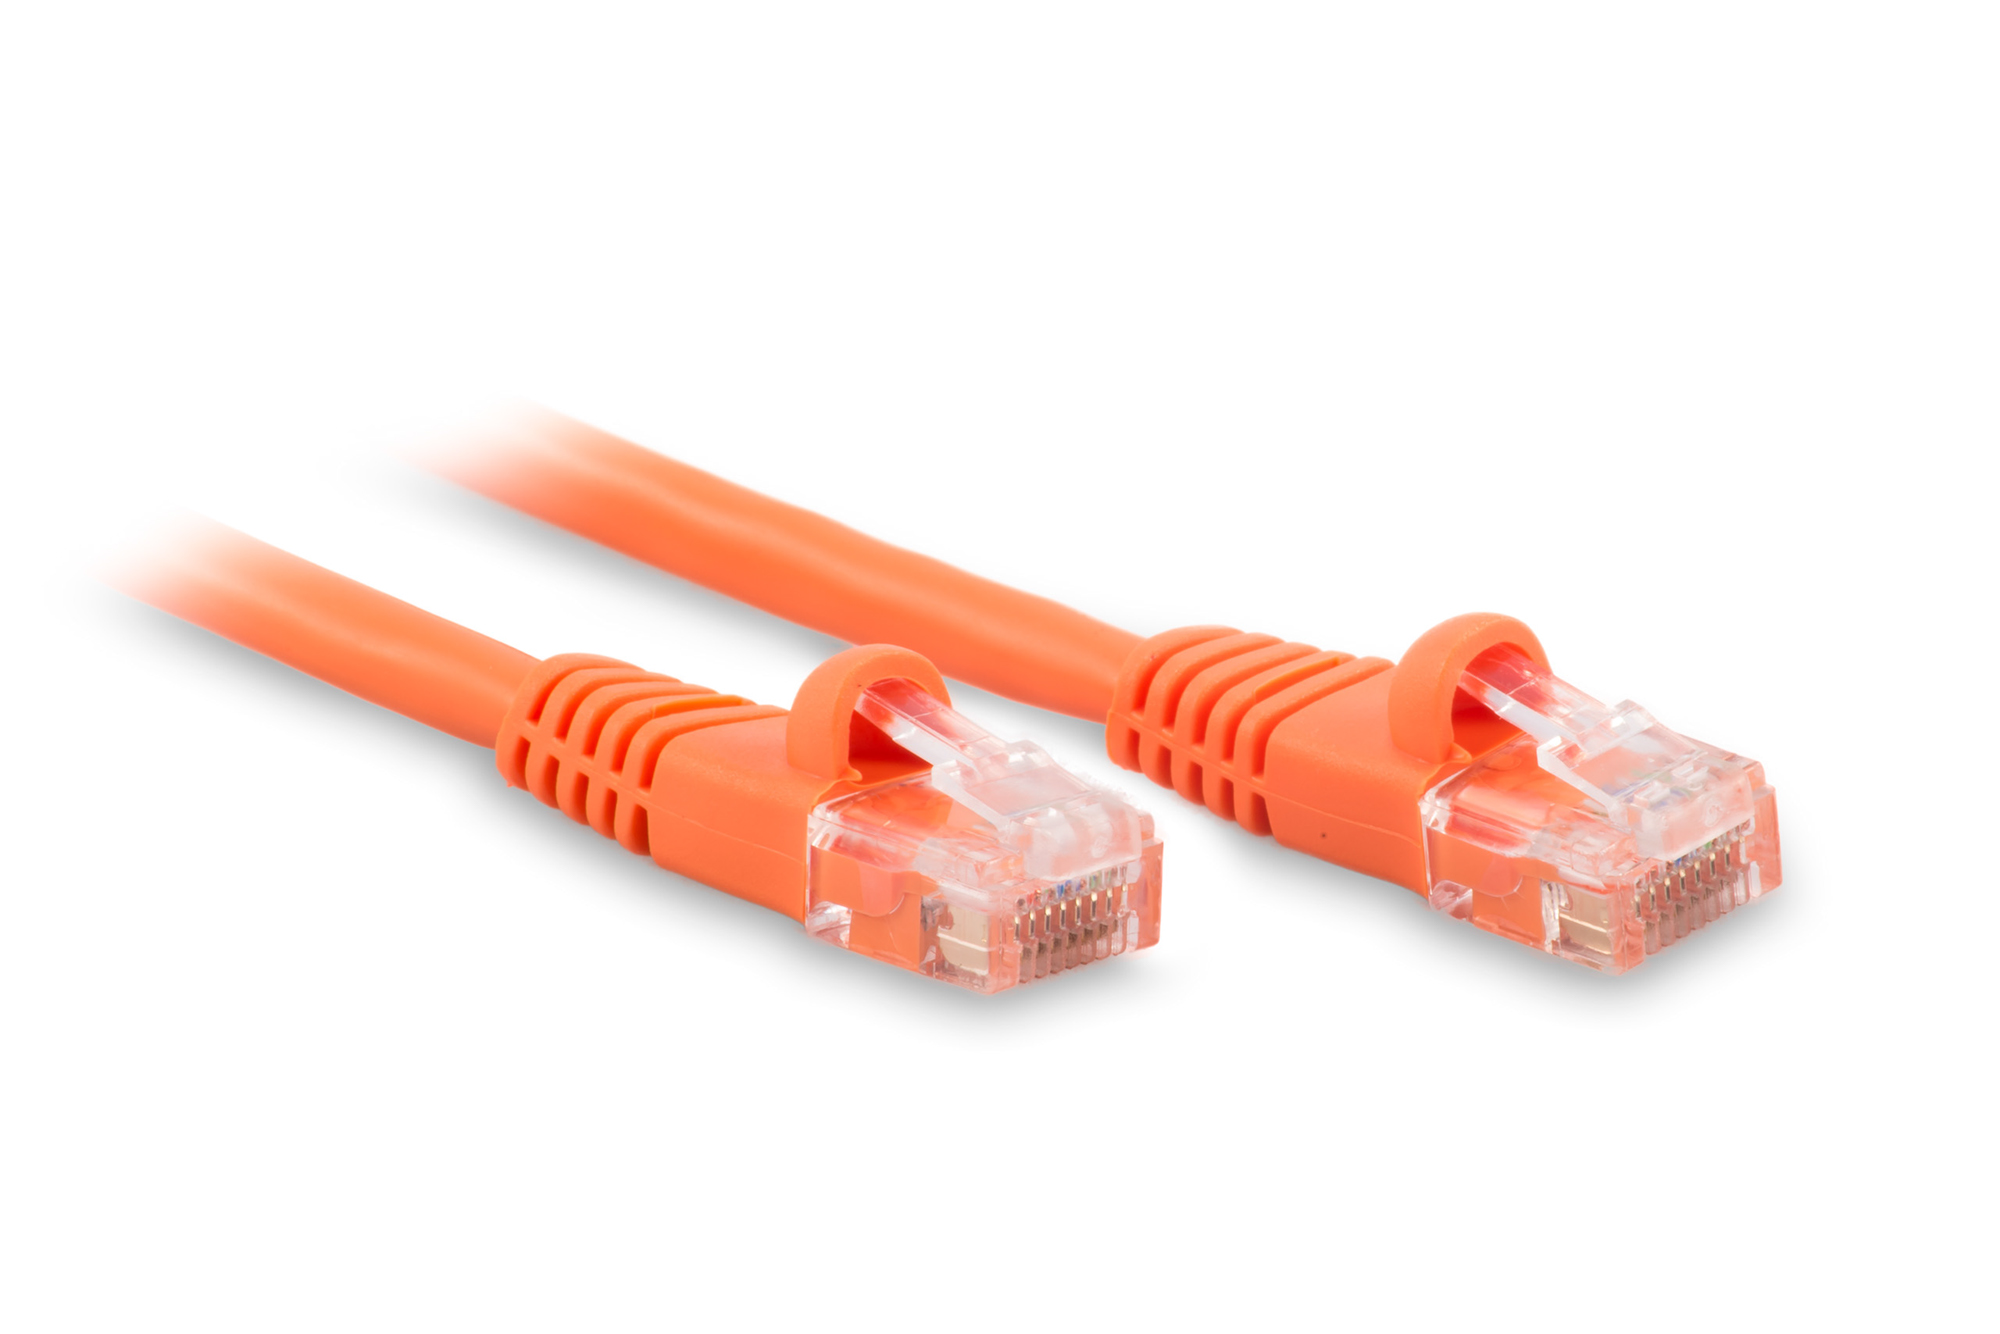 1ft Cat6 Ethernet Patch Cable - Orange Color - Snagless Boot